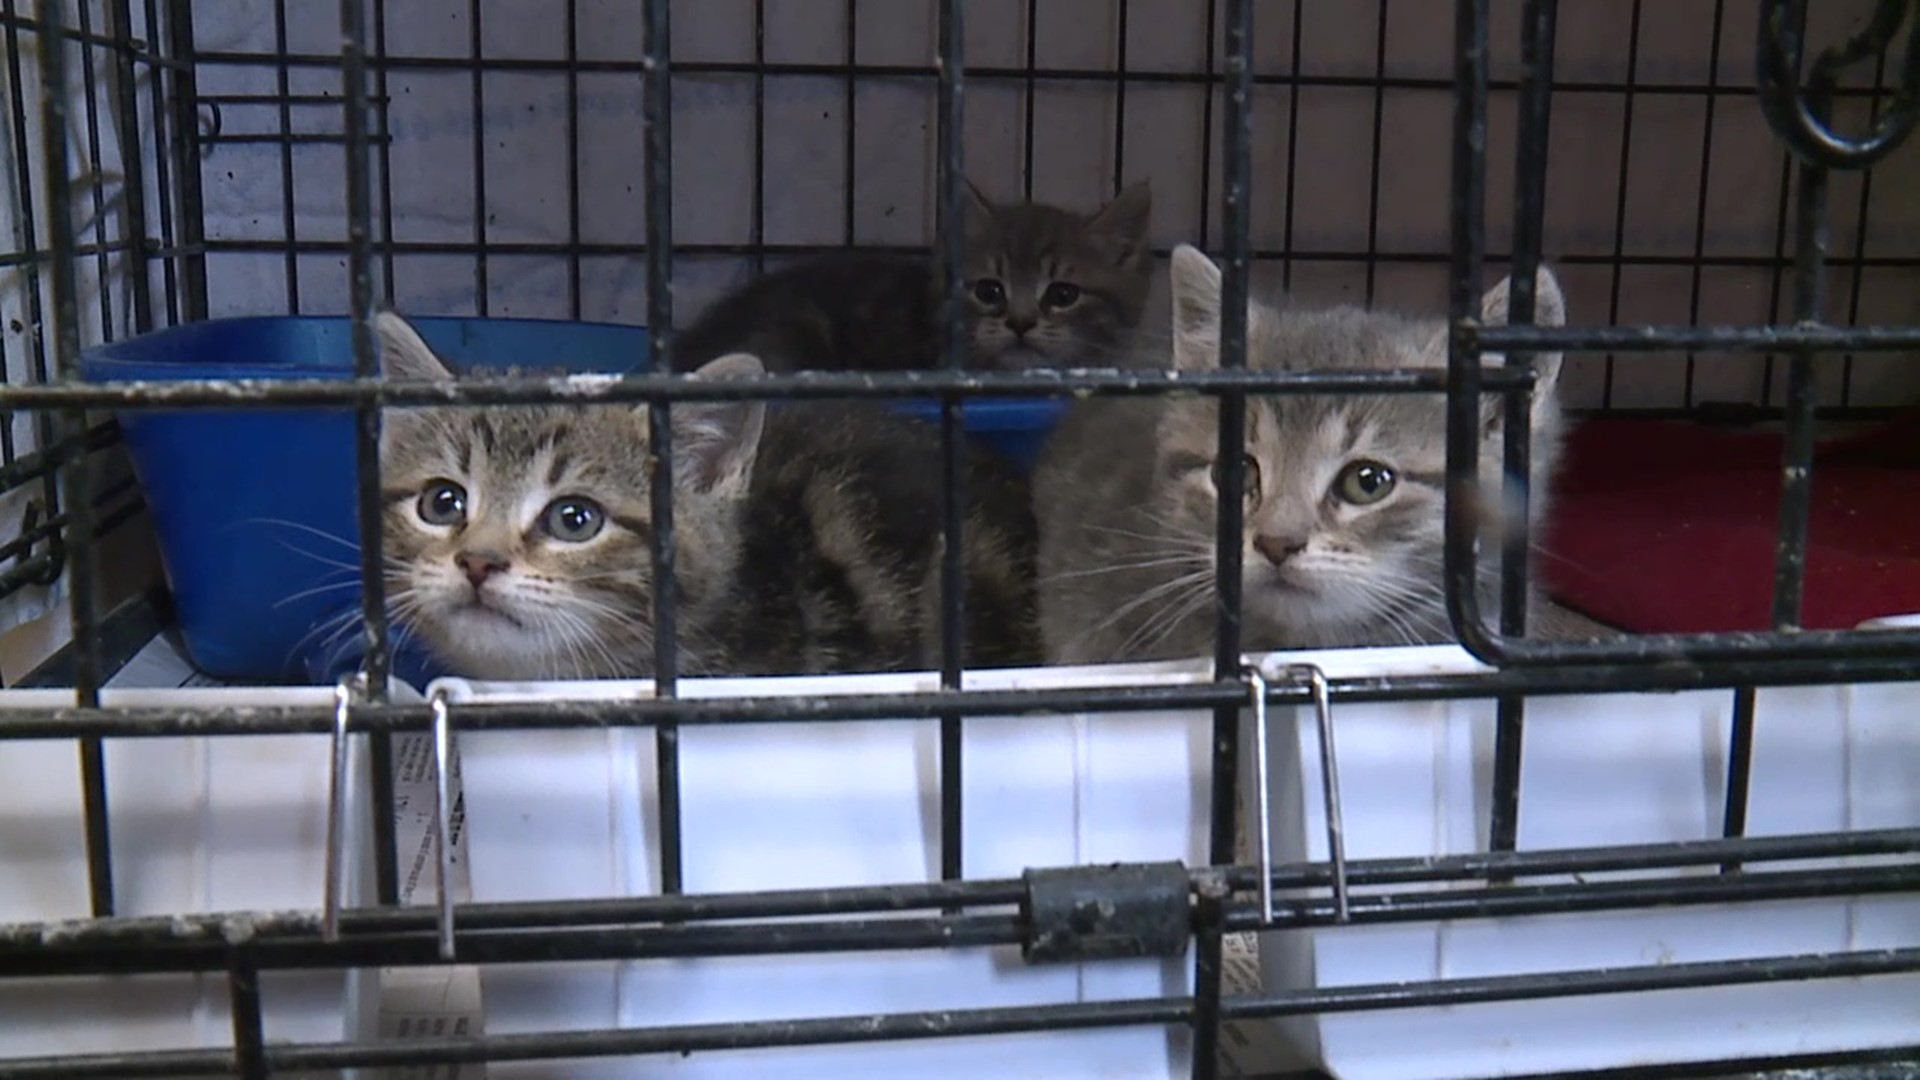 A charity in Scranton that aims to curb the city's feral cat problem is struggling to stay on top of it amid the coronavirus pandemic.